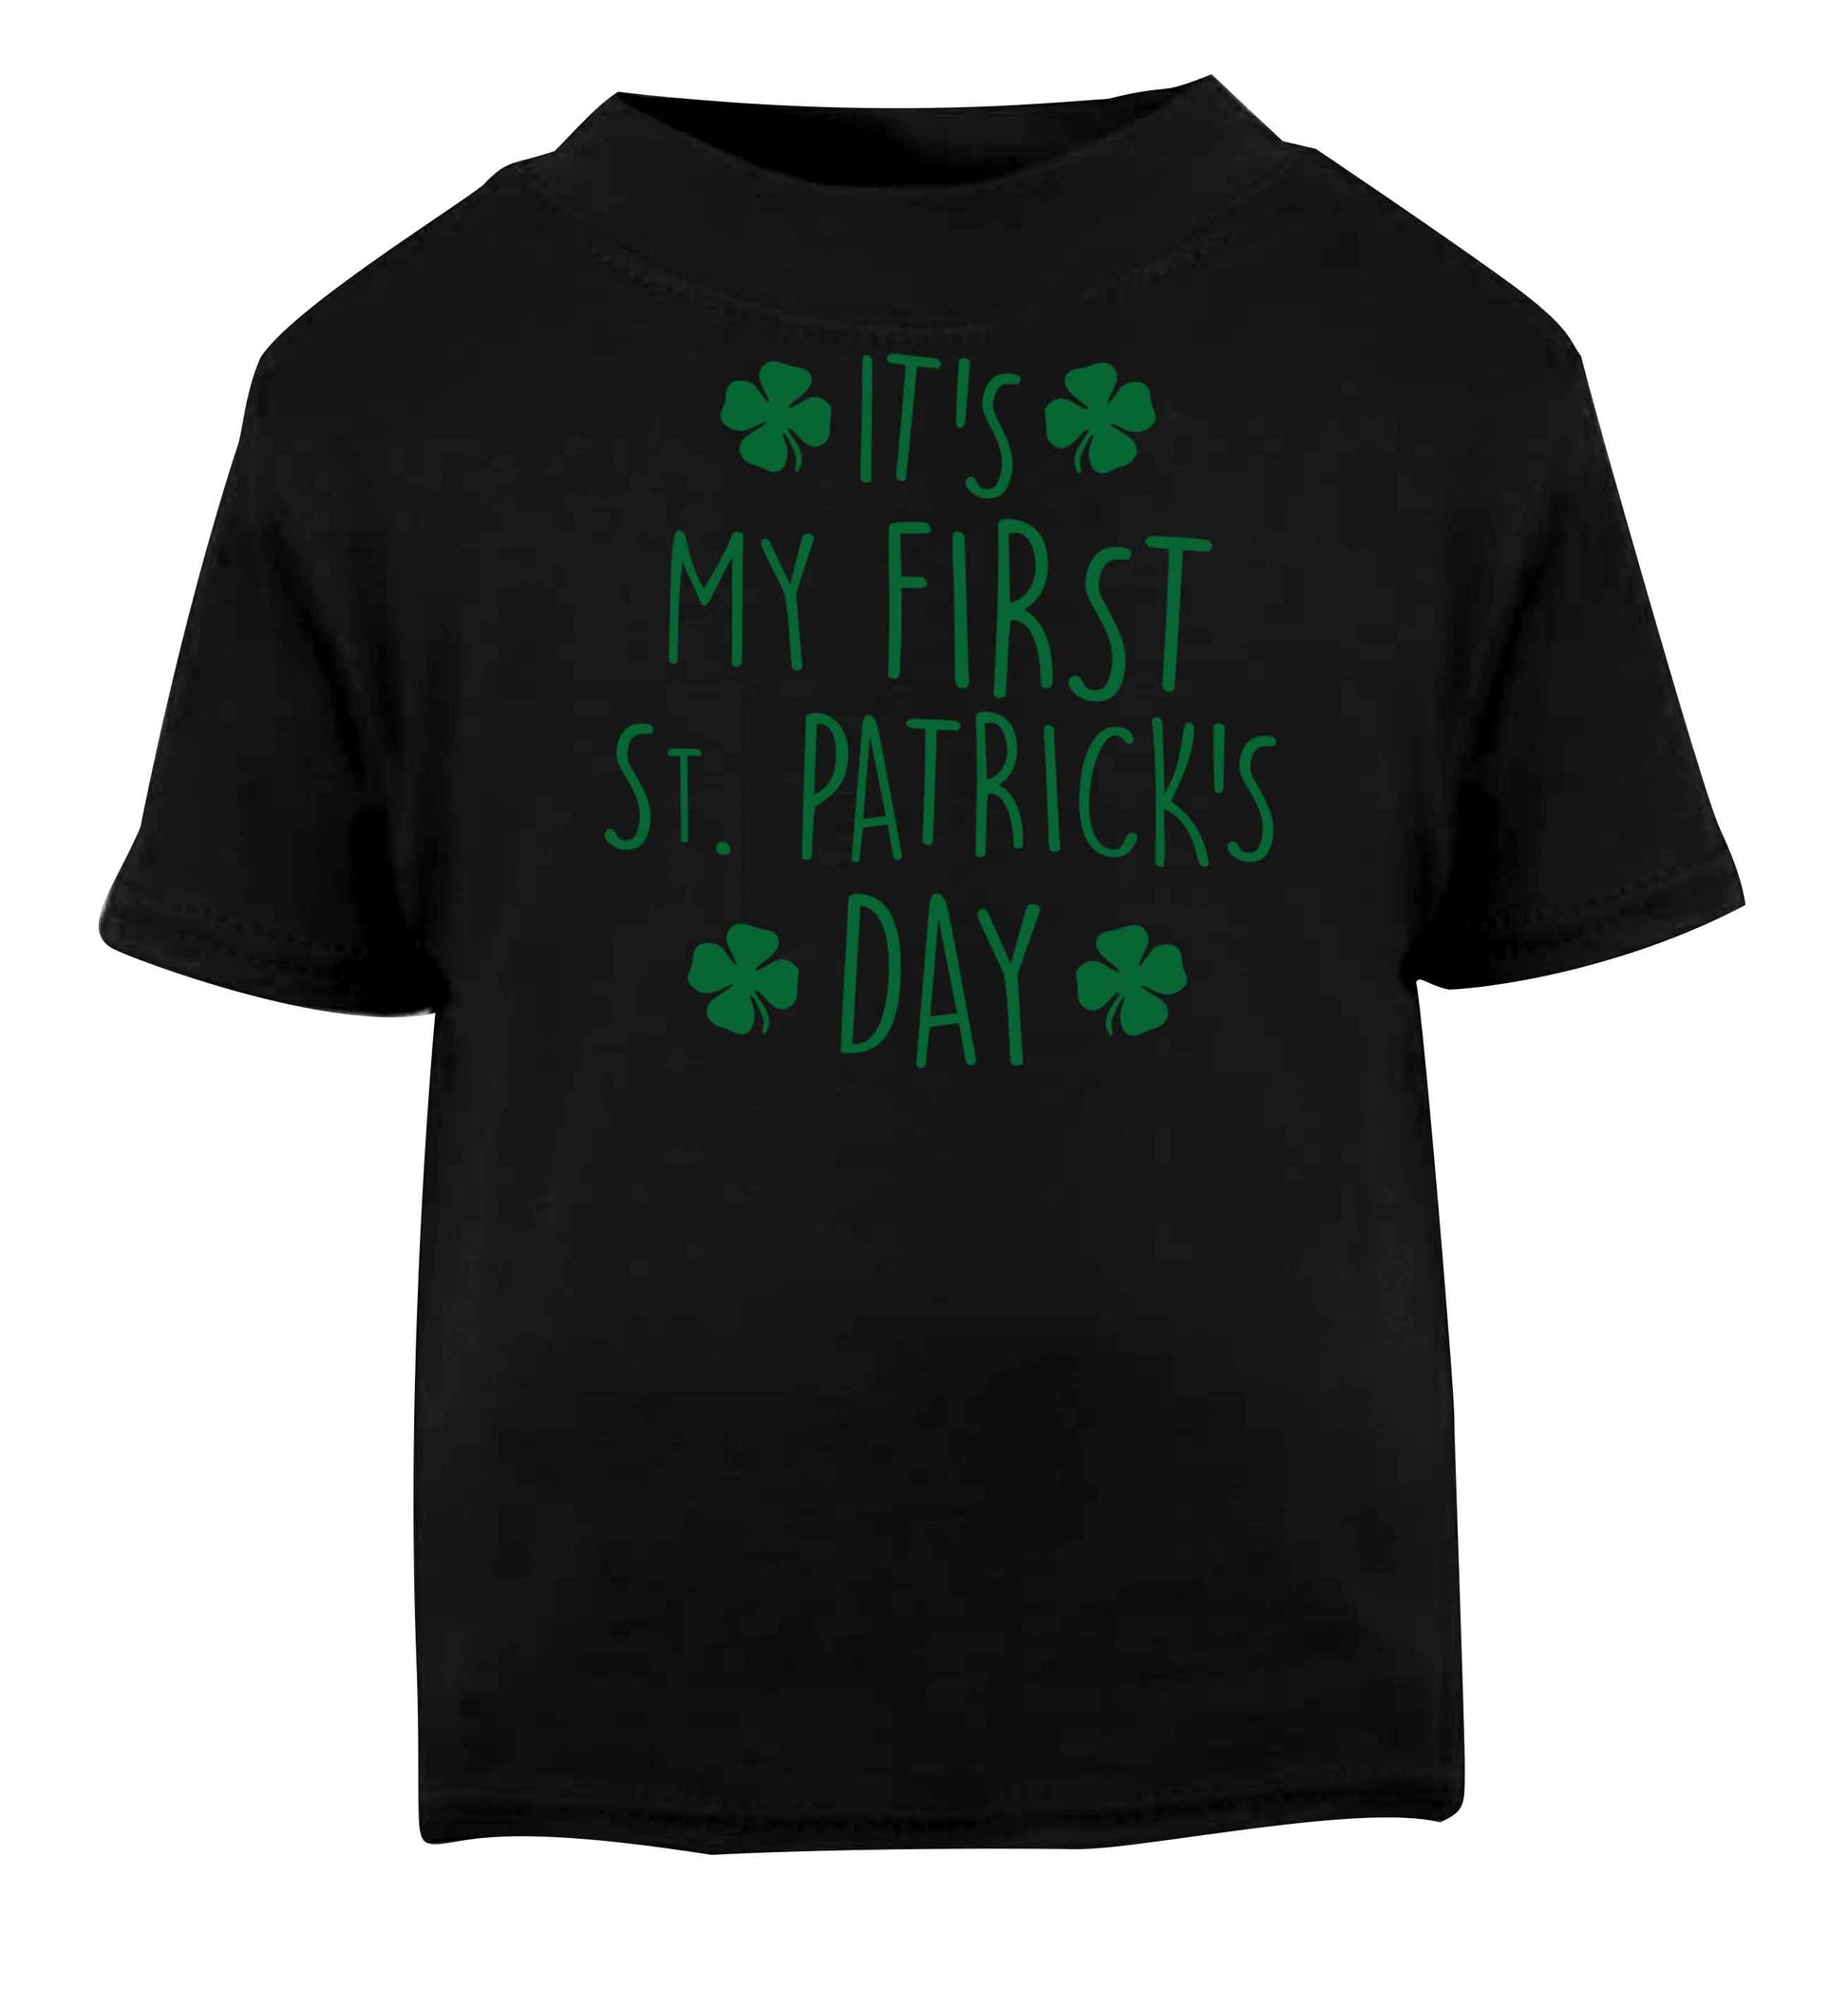 It's my first St.Patrick's day Black baby toddler Tshirt 2 years